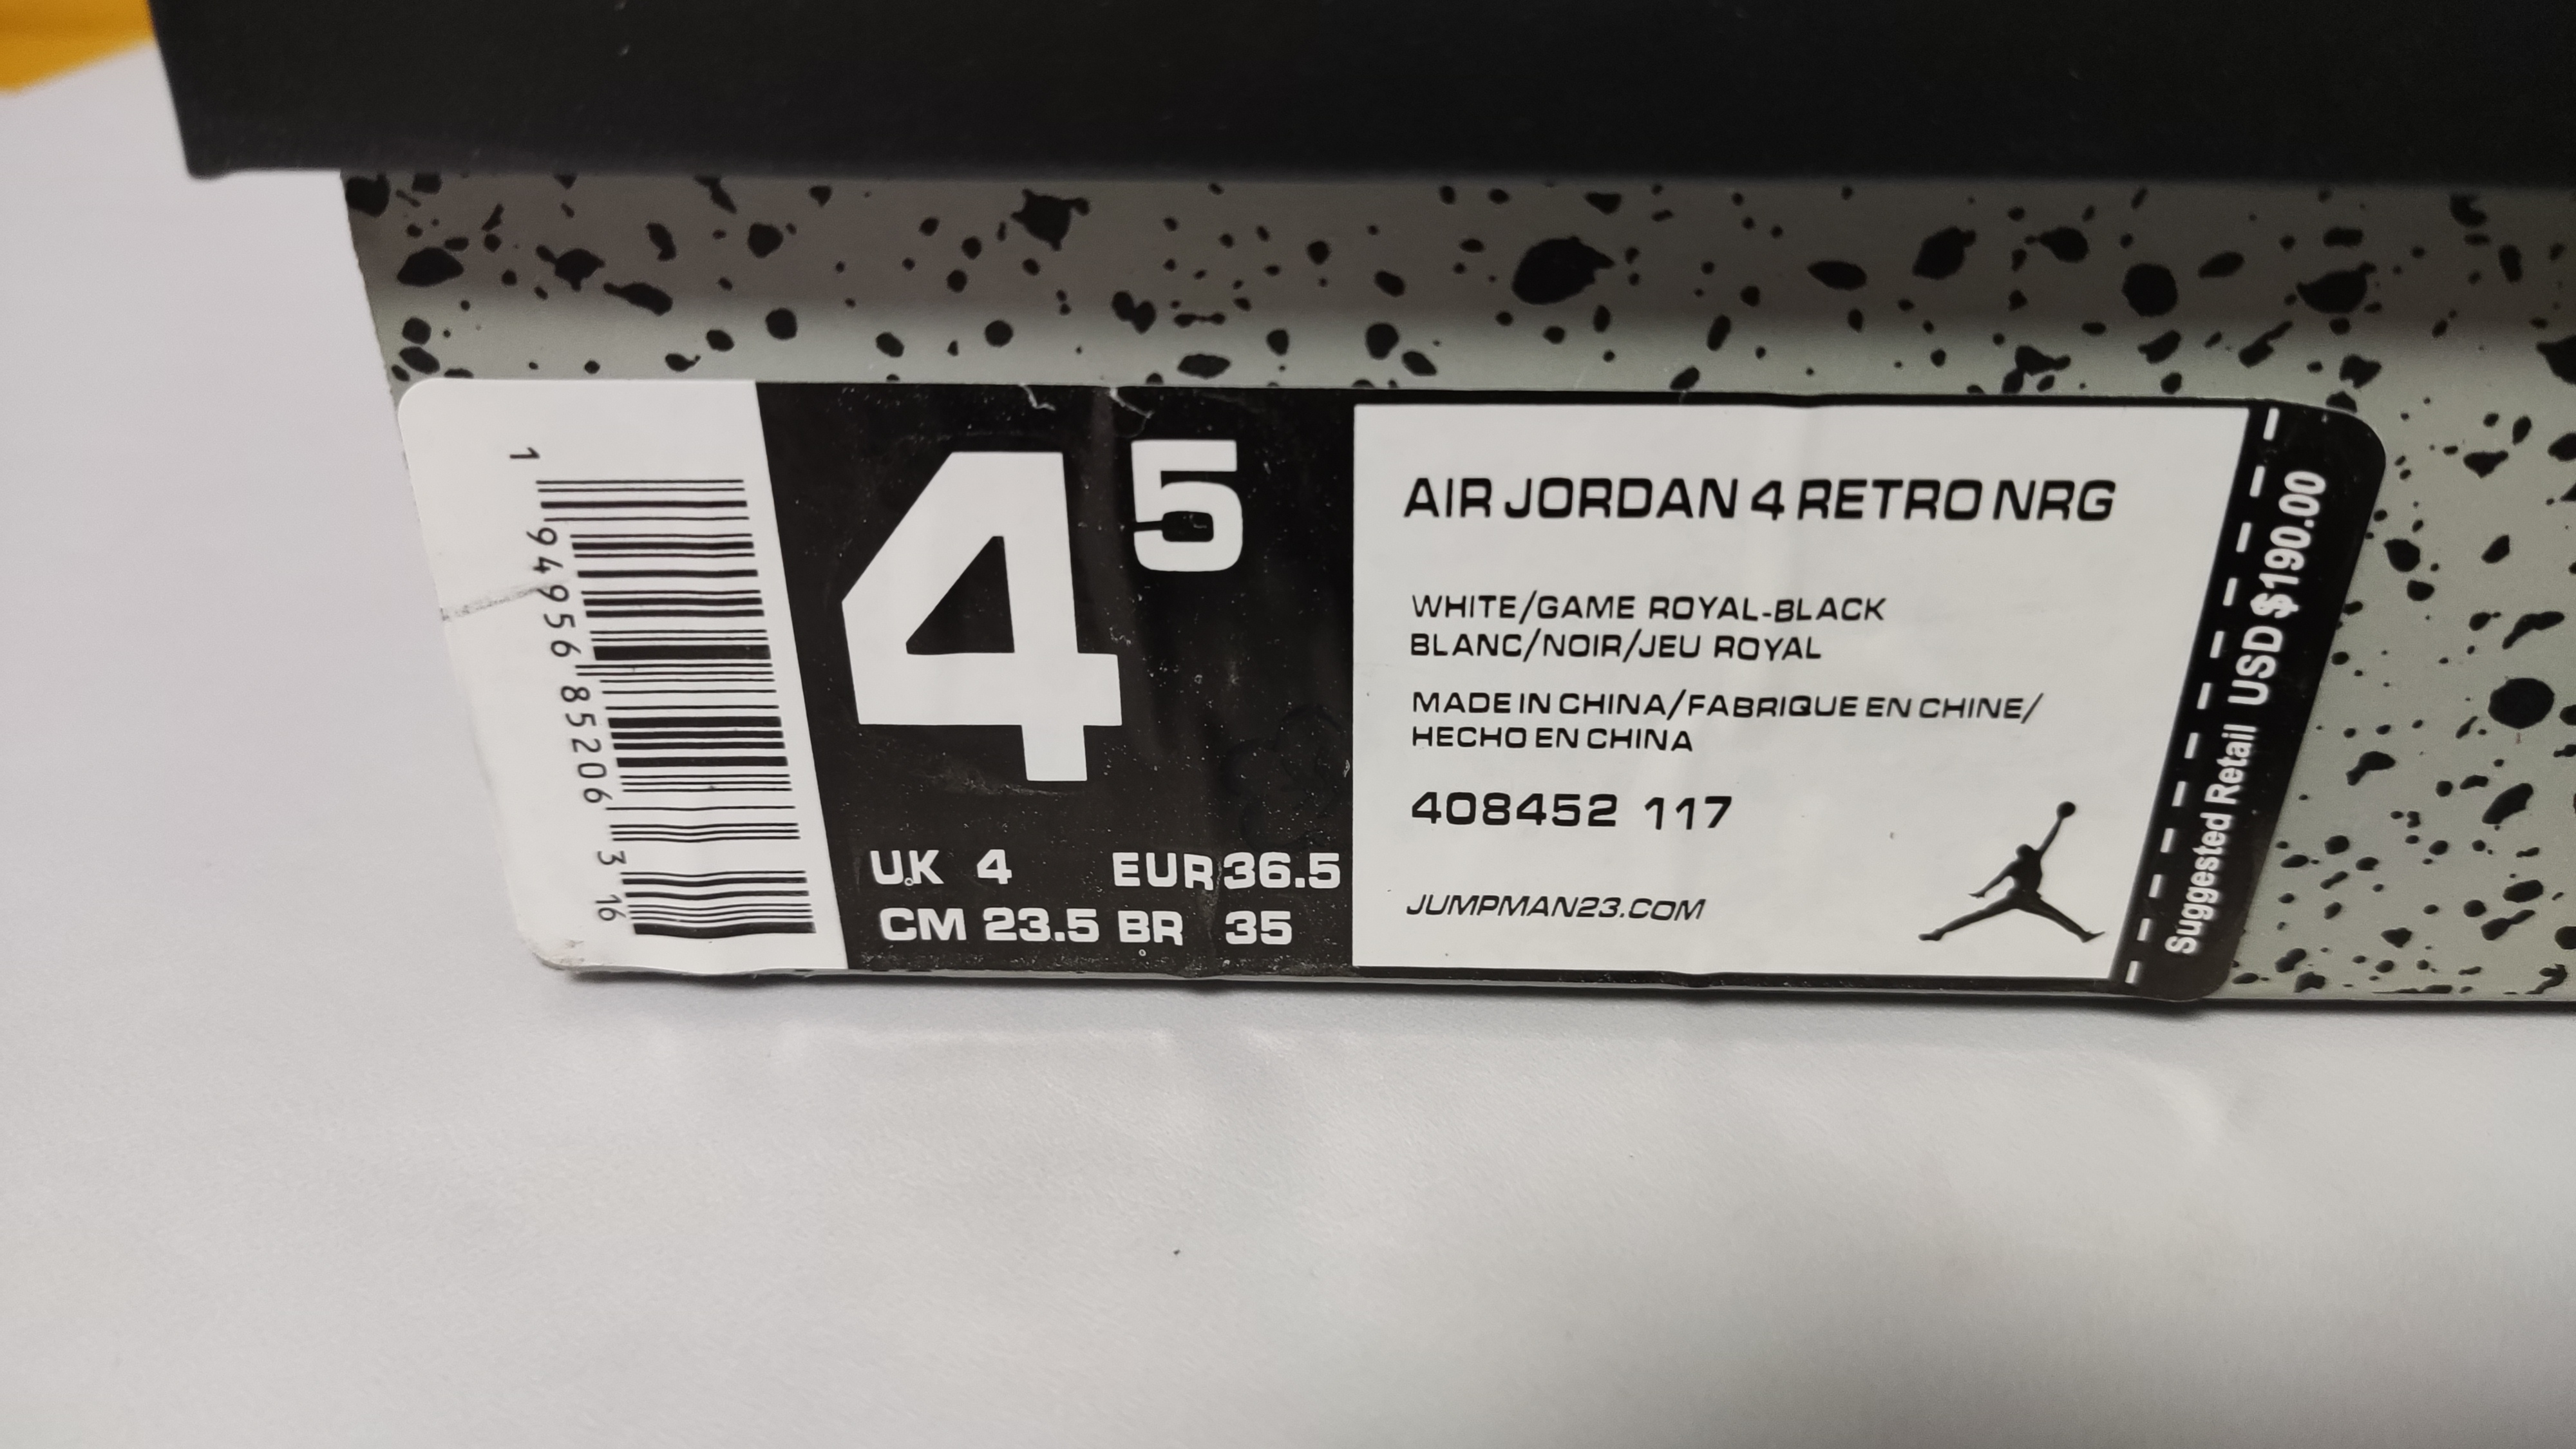 Quality Check Picture Replica Jordan 4 Retro Motorsports From Jdfoot